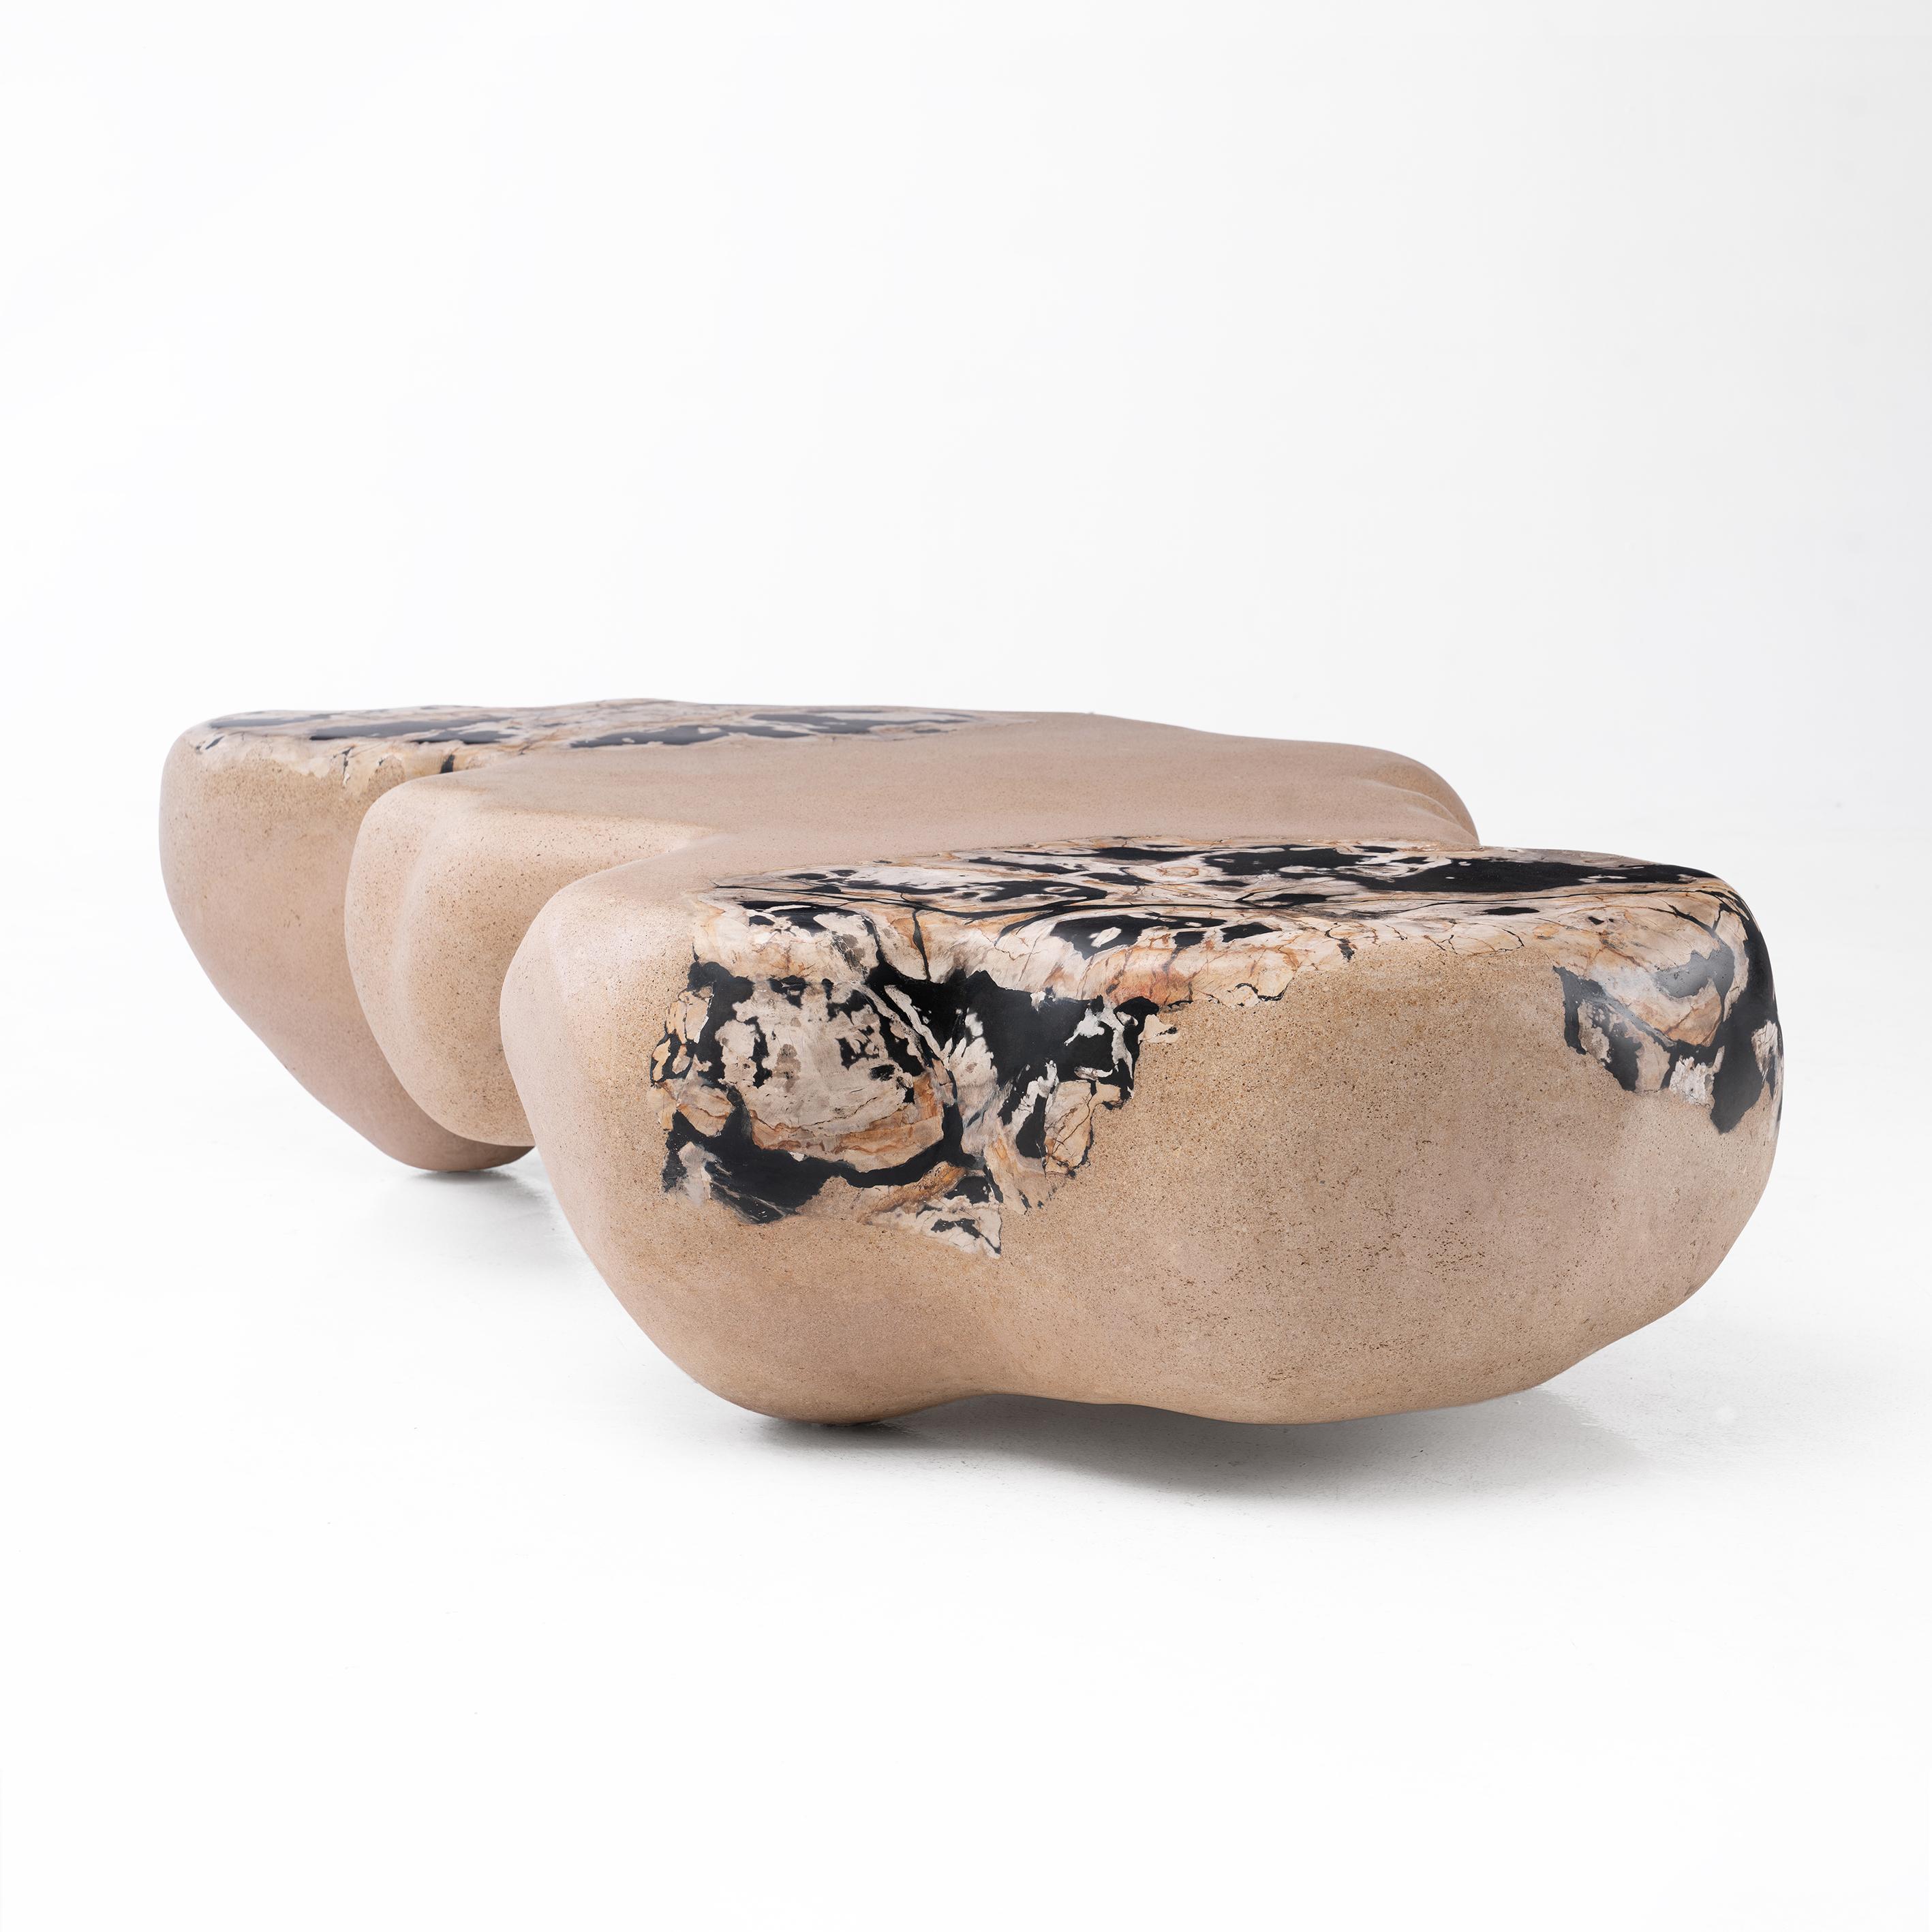 'Into The Inferno' is a sculptural coffee table, inspired by the process in which the elements and continuity of time shape our world. This piece conveys the raw beauty of geomorphic forms and the natural qualities of the materials